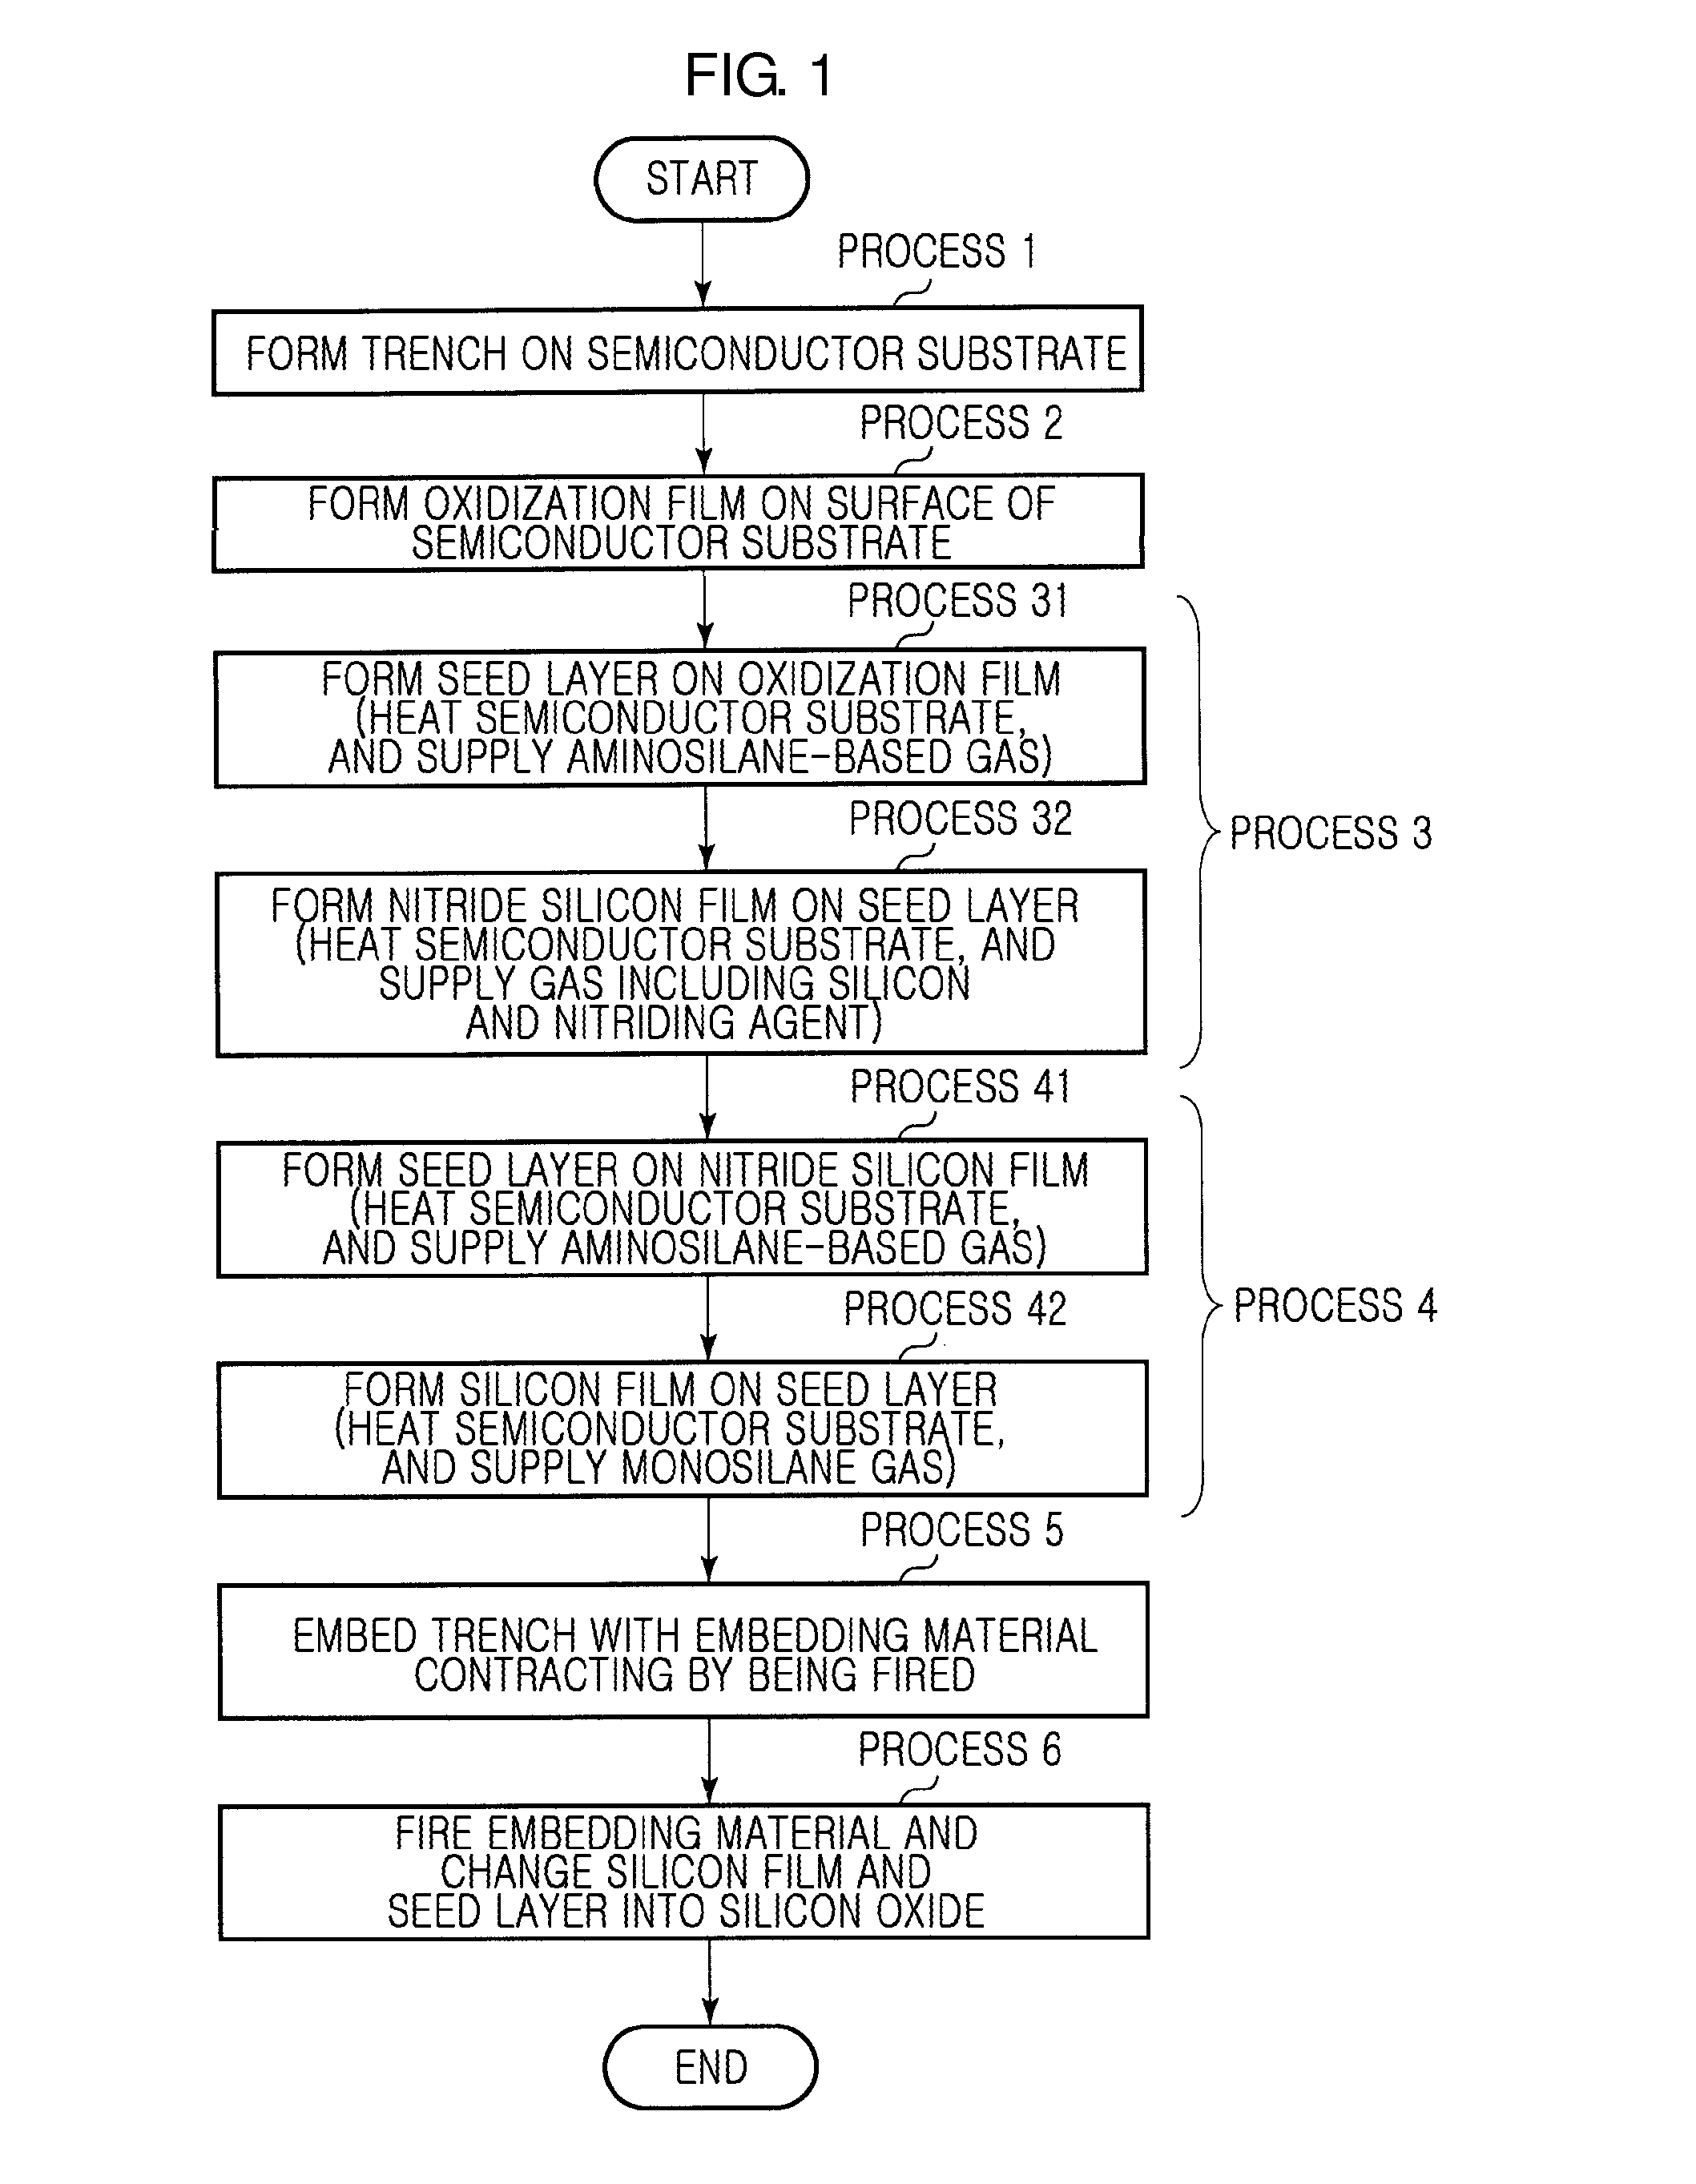 Trench embedding method and film-forming apparatus